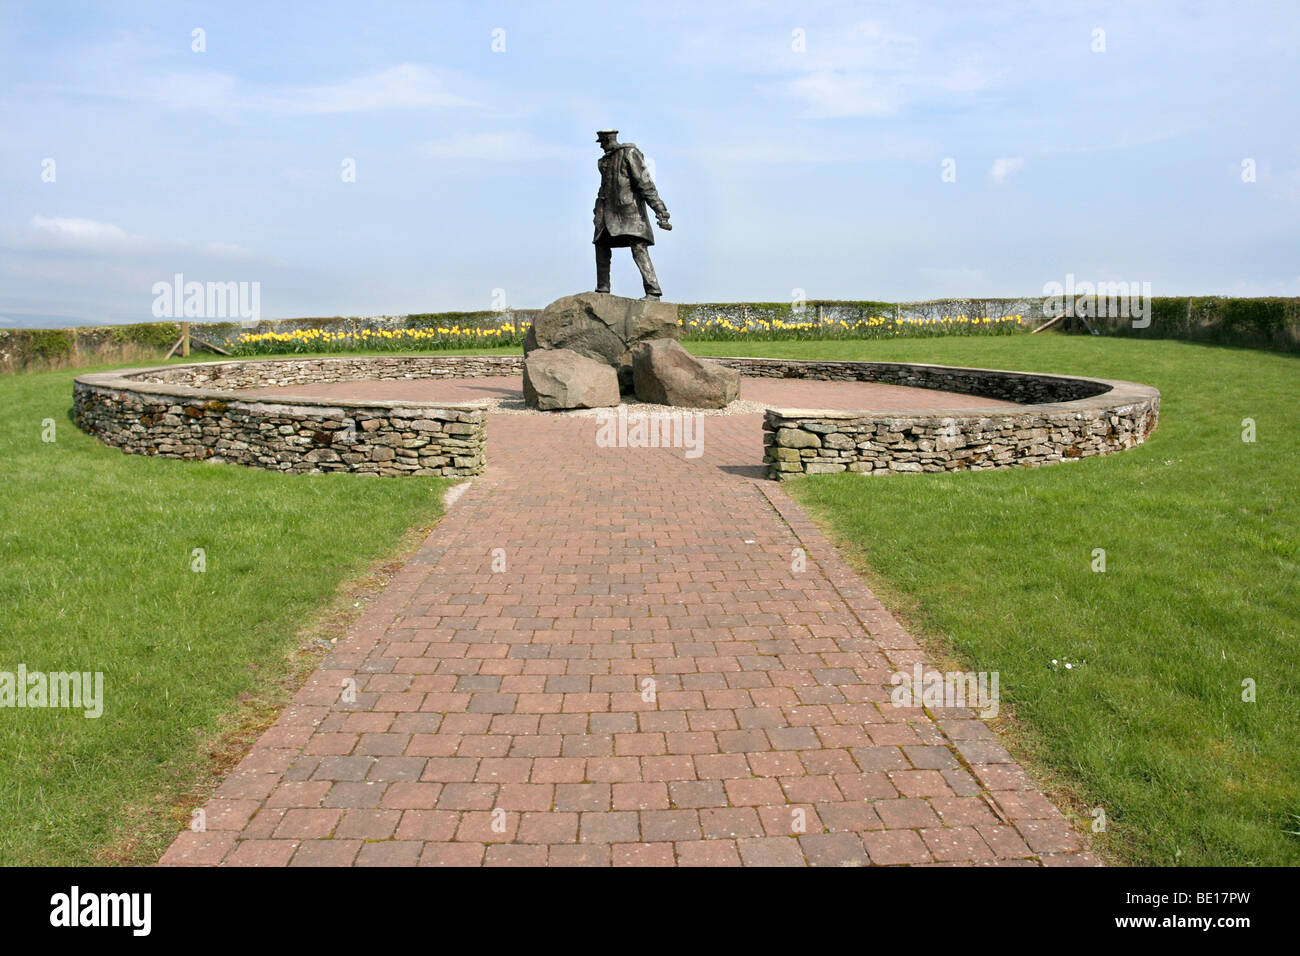 Statue of Colonel Sir David Stirling in Scotland. Founder of Special Air Service Regiment in Scotland during WOrld War II. Stock Photo